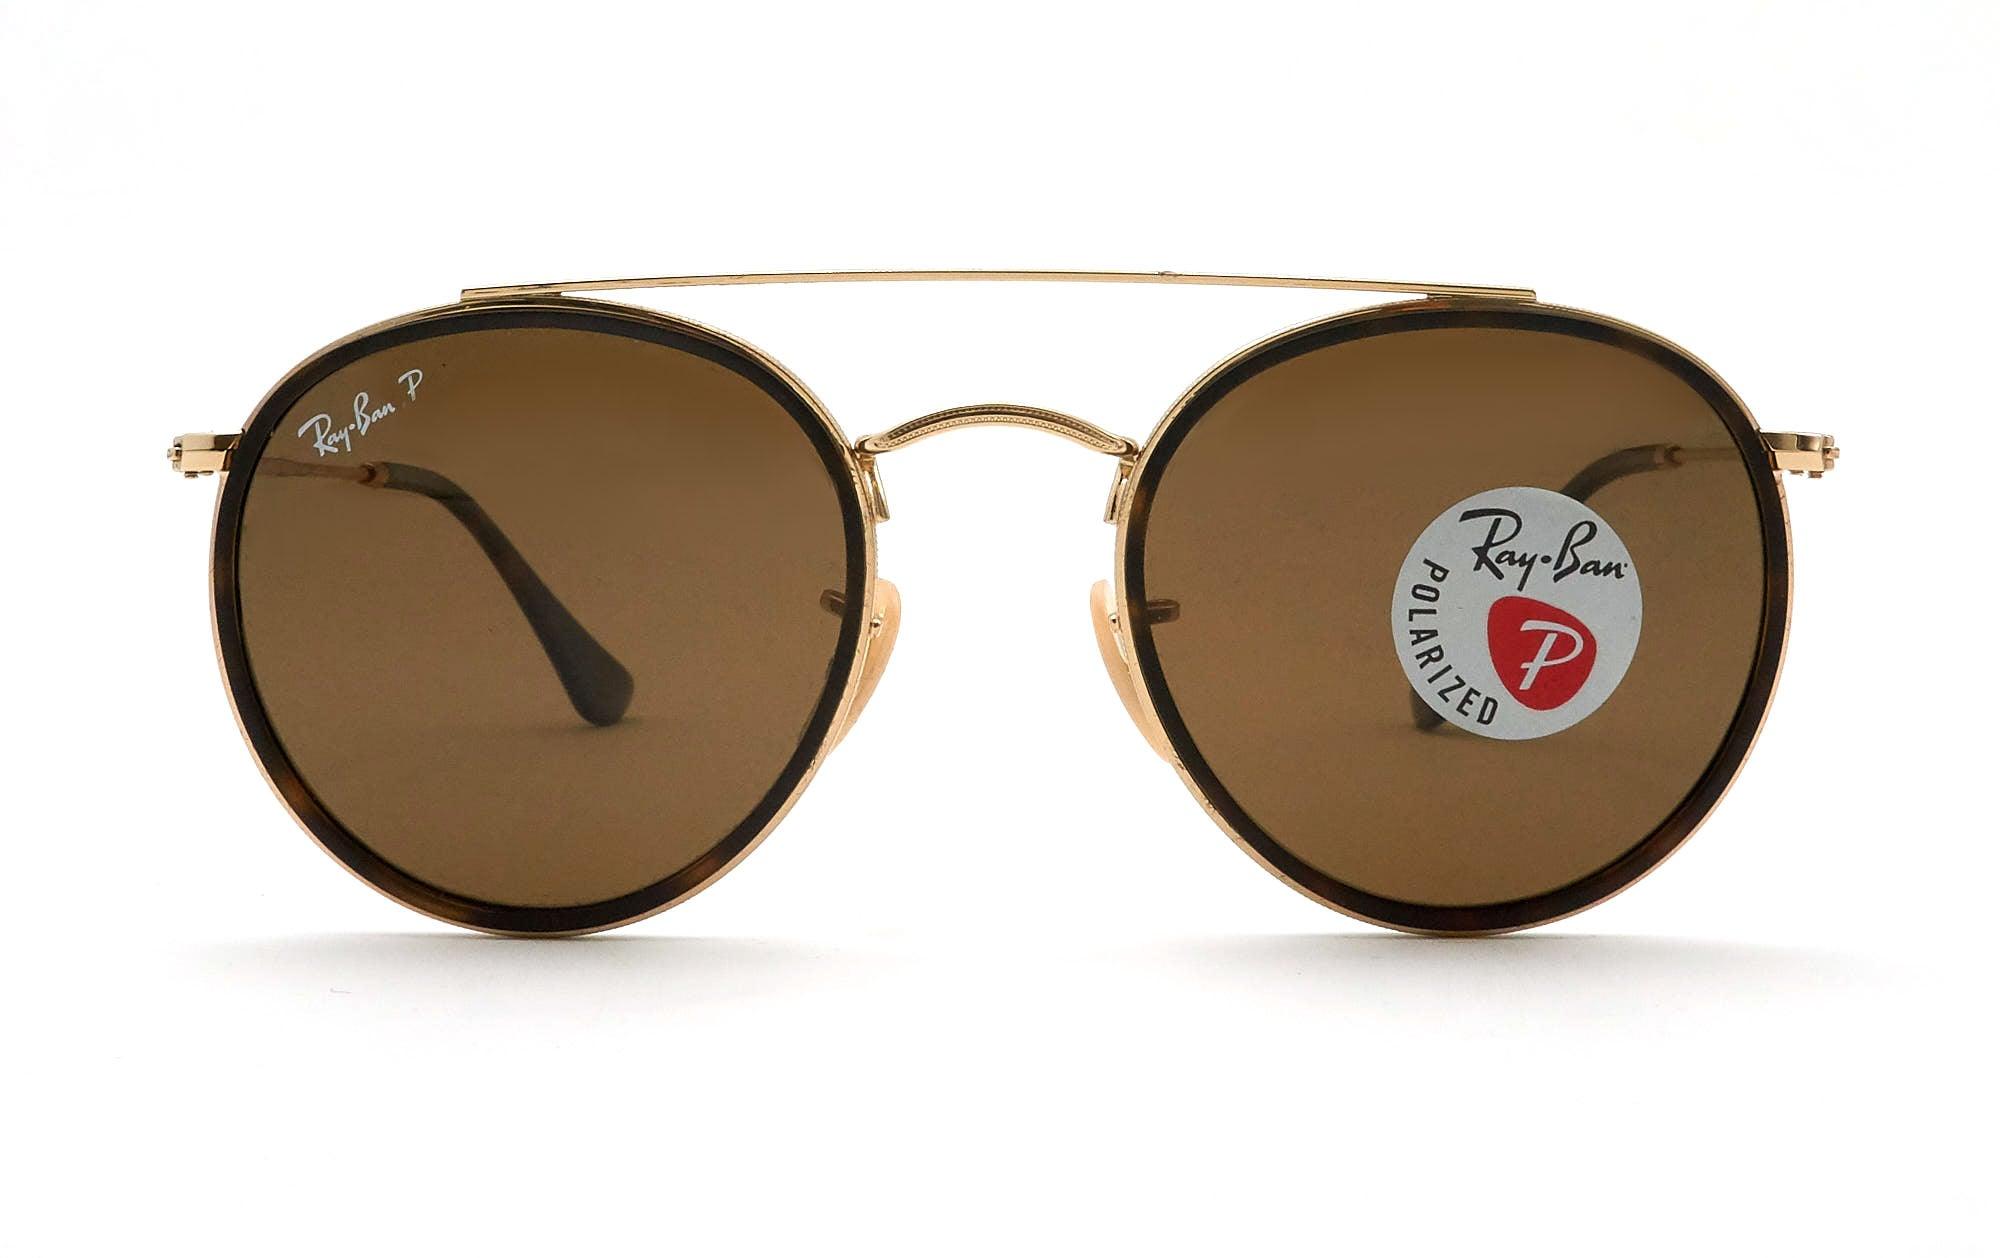 RAY-BAN 3647N 001 57 - Opticas Lookout